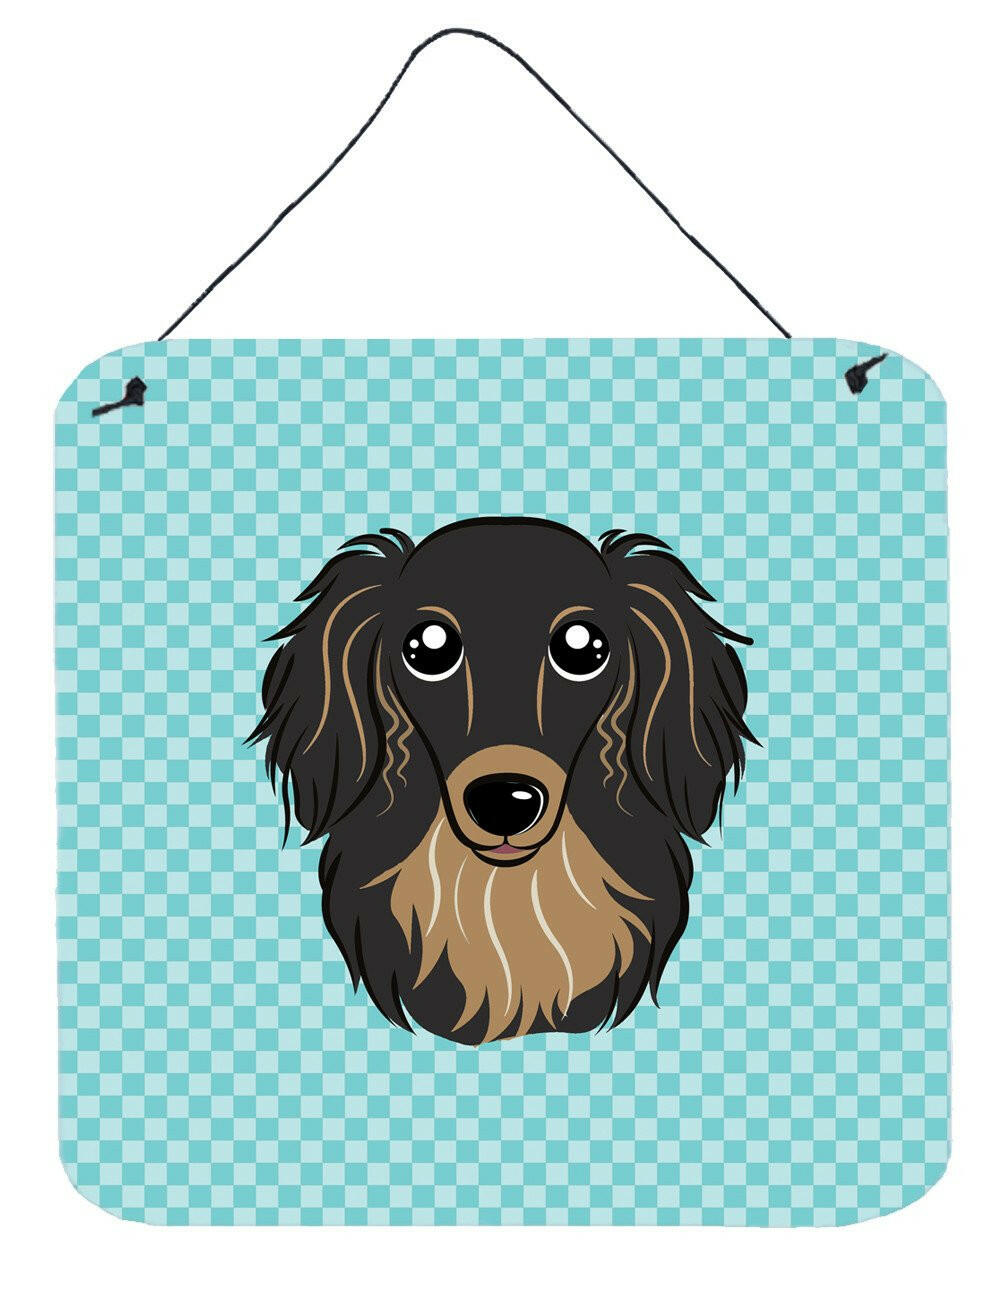 Checkerboard Blue Longhair Black and Tan Dachshund Wall or Door Hanging Prints BB1151DS66 by Caroline's Treasures